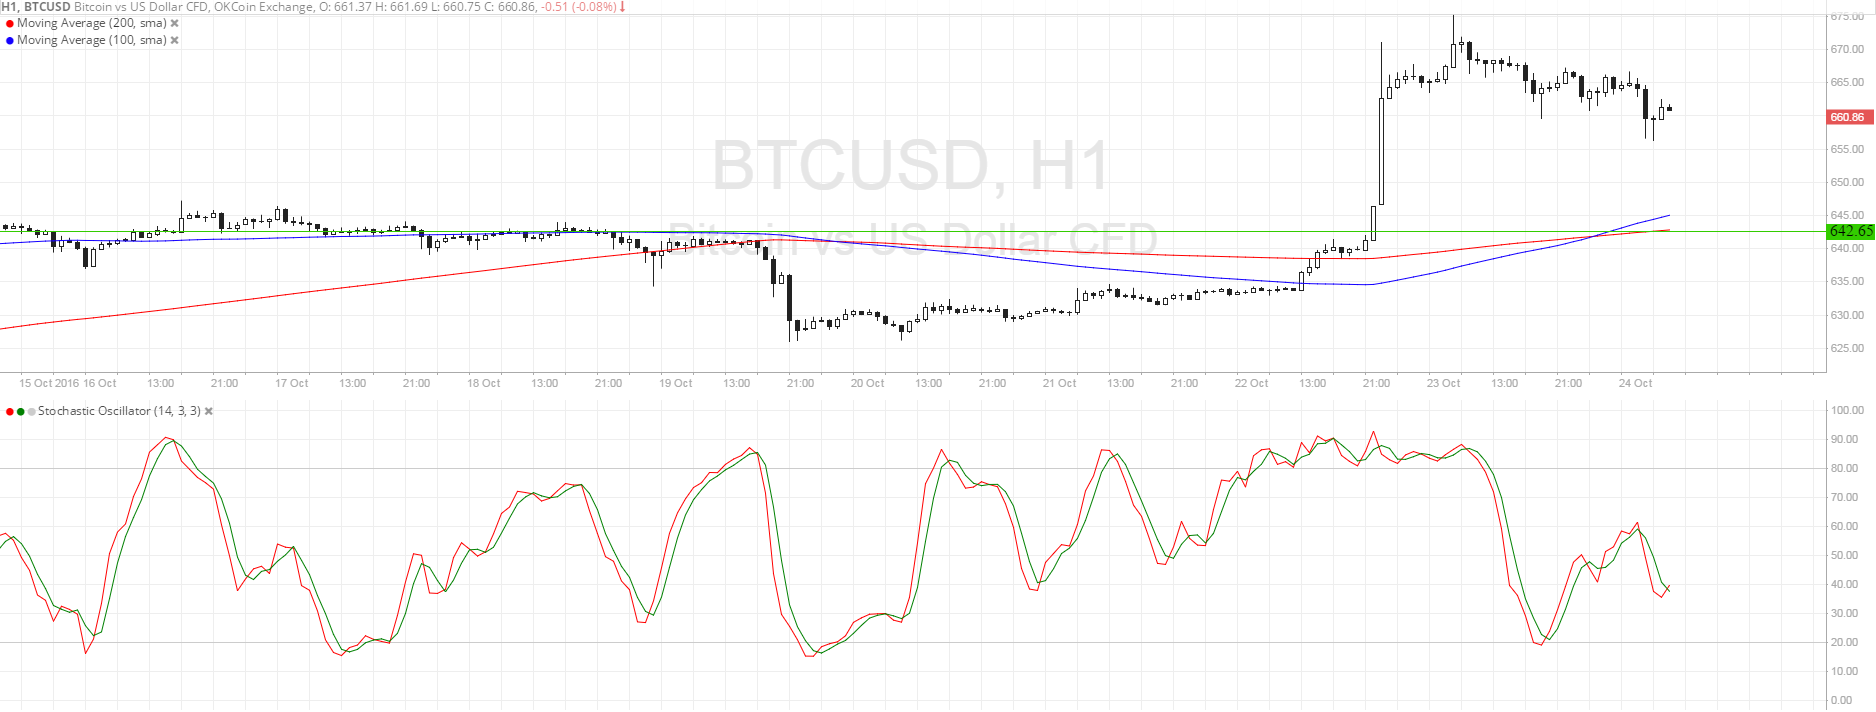 Bitcoin Price Technical Analysis for 10/24/2016 - Another Pullback Opportunity!